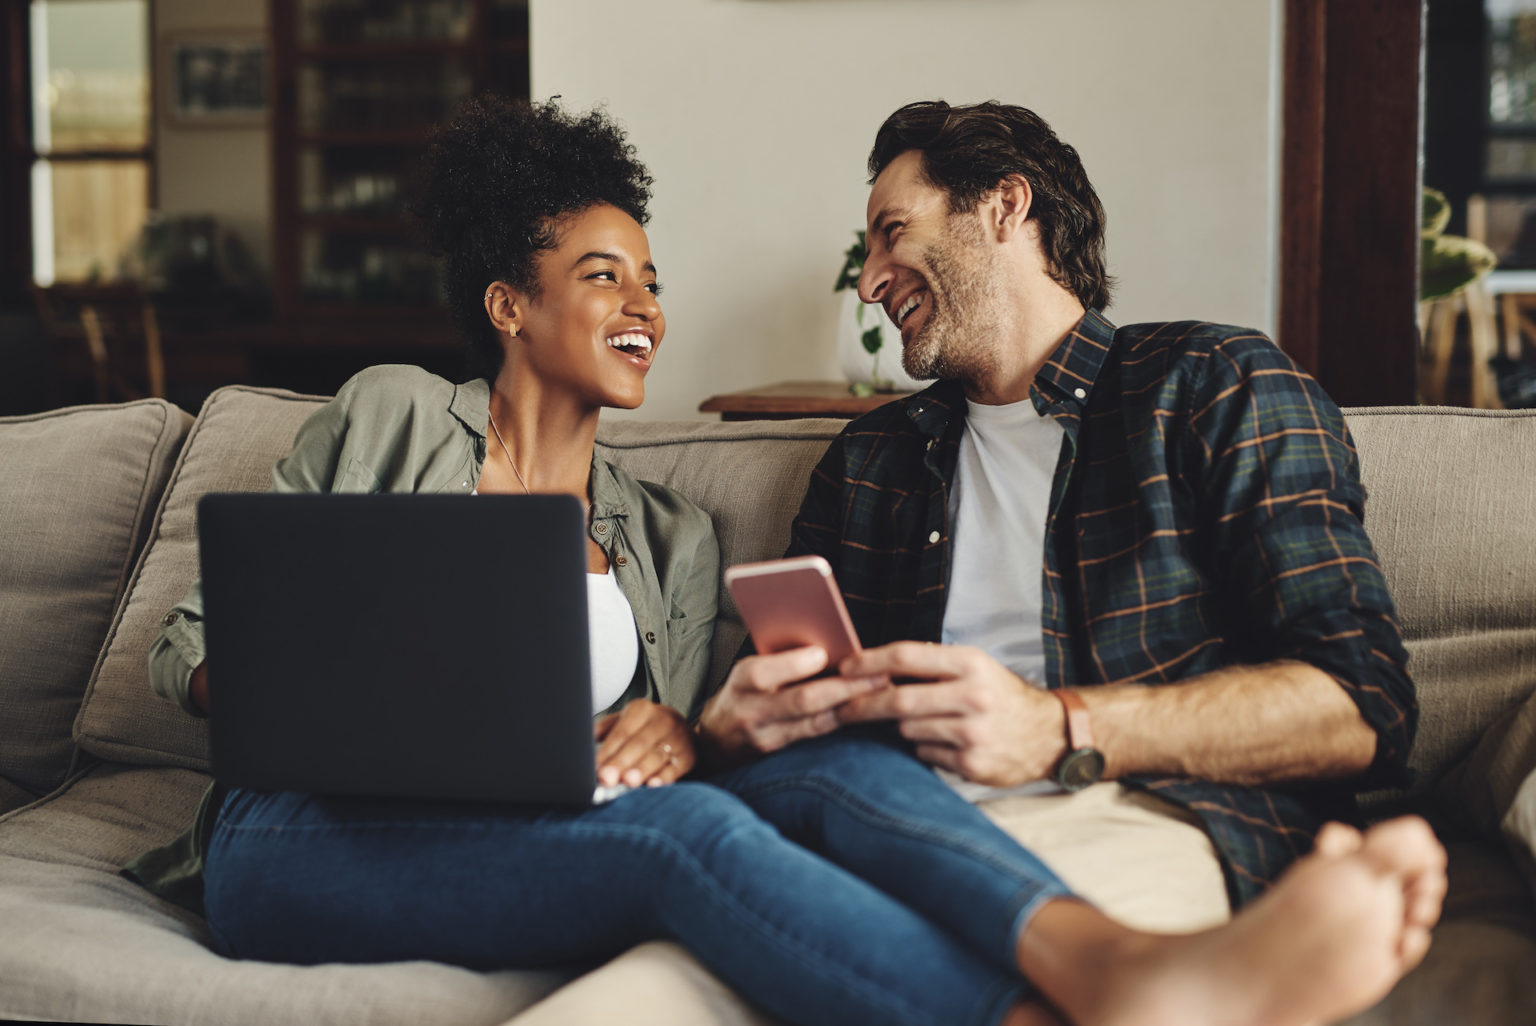 Shot of a happy young couple using a laptop and cellphone while relaxing on a couch home